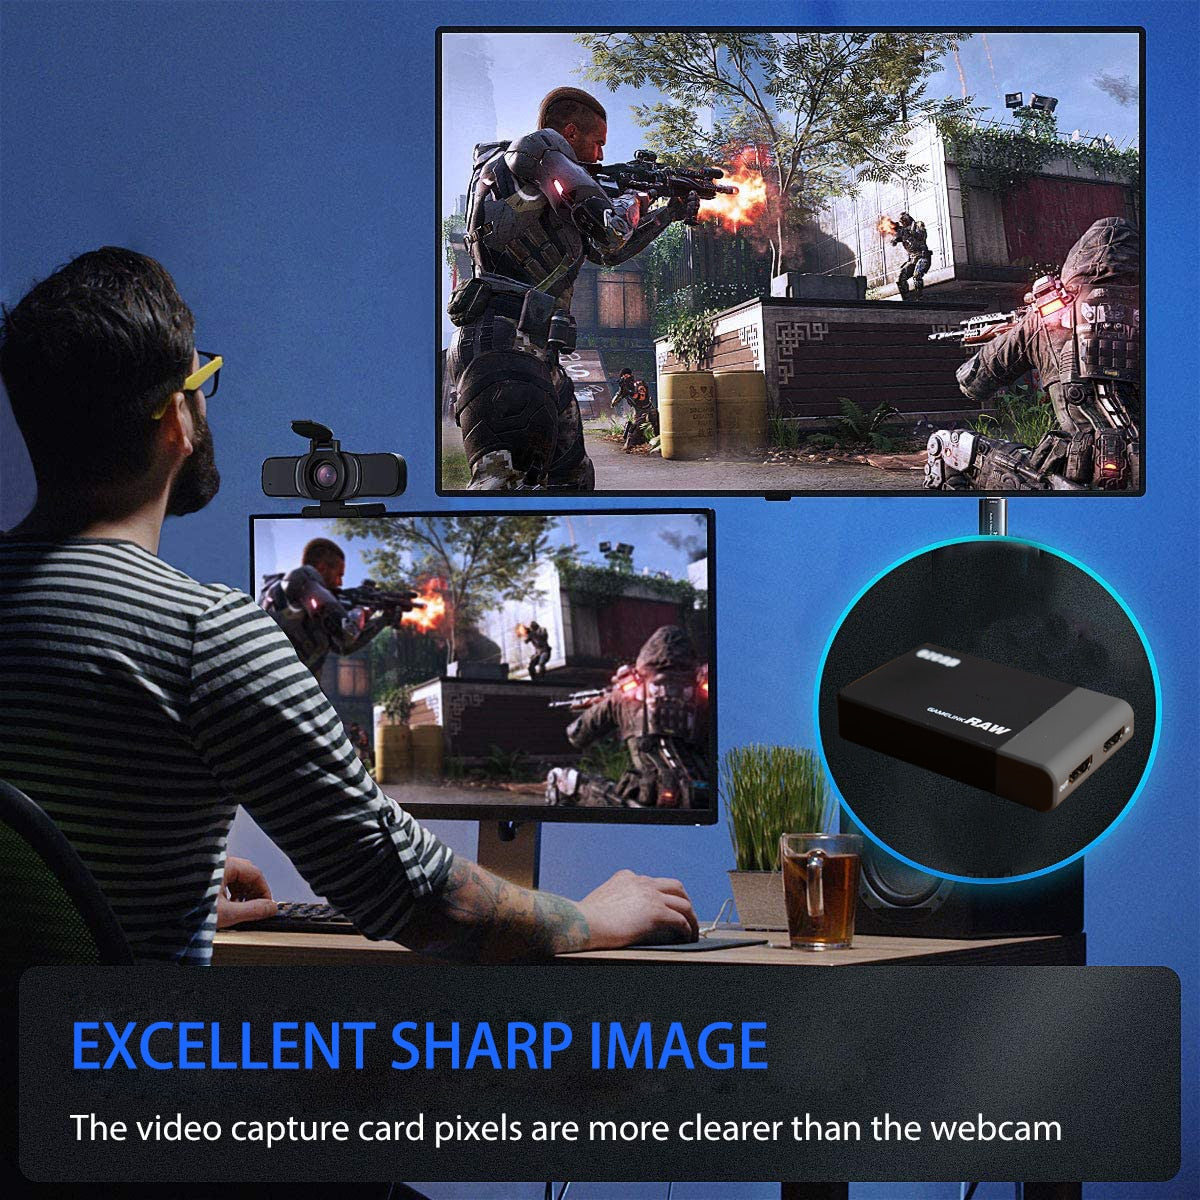 Real 4k 30hz 1080p 60fps 120fps USB 3.0 HDMI-compatible Video Capture Card Ultra HD Video Recording Device Live Streaming Box.